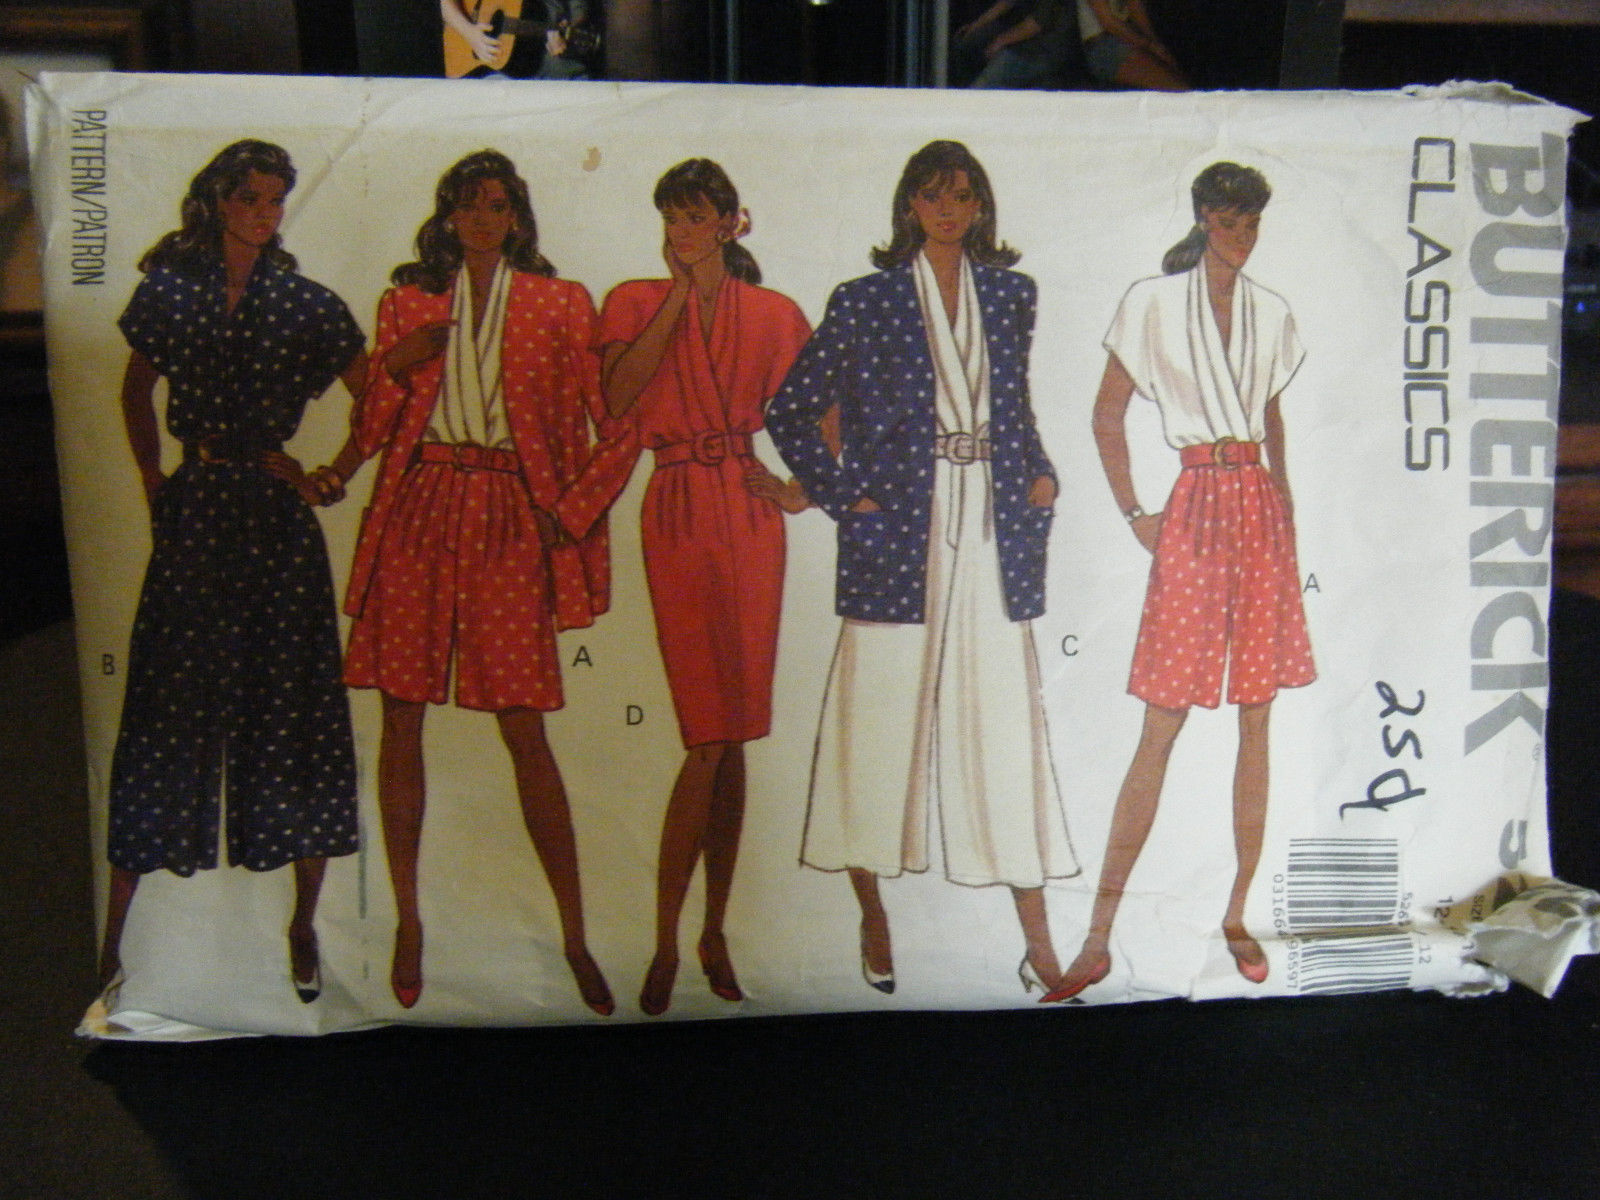 Primary image for Butterick 5262 Misses Unlined Jacket & Dress Pattern - Size 12/14/16